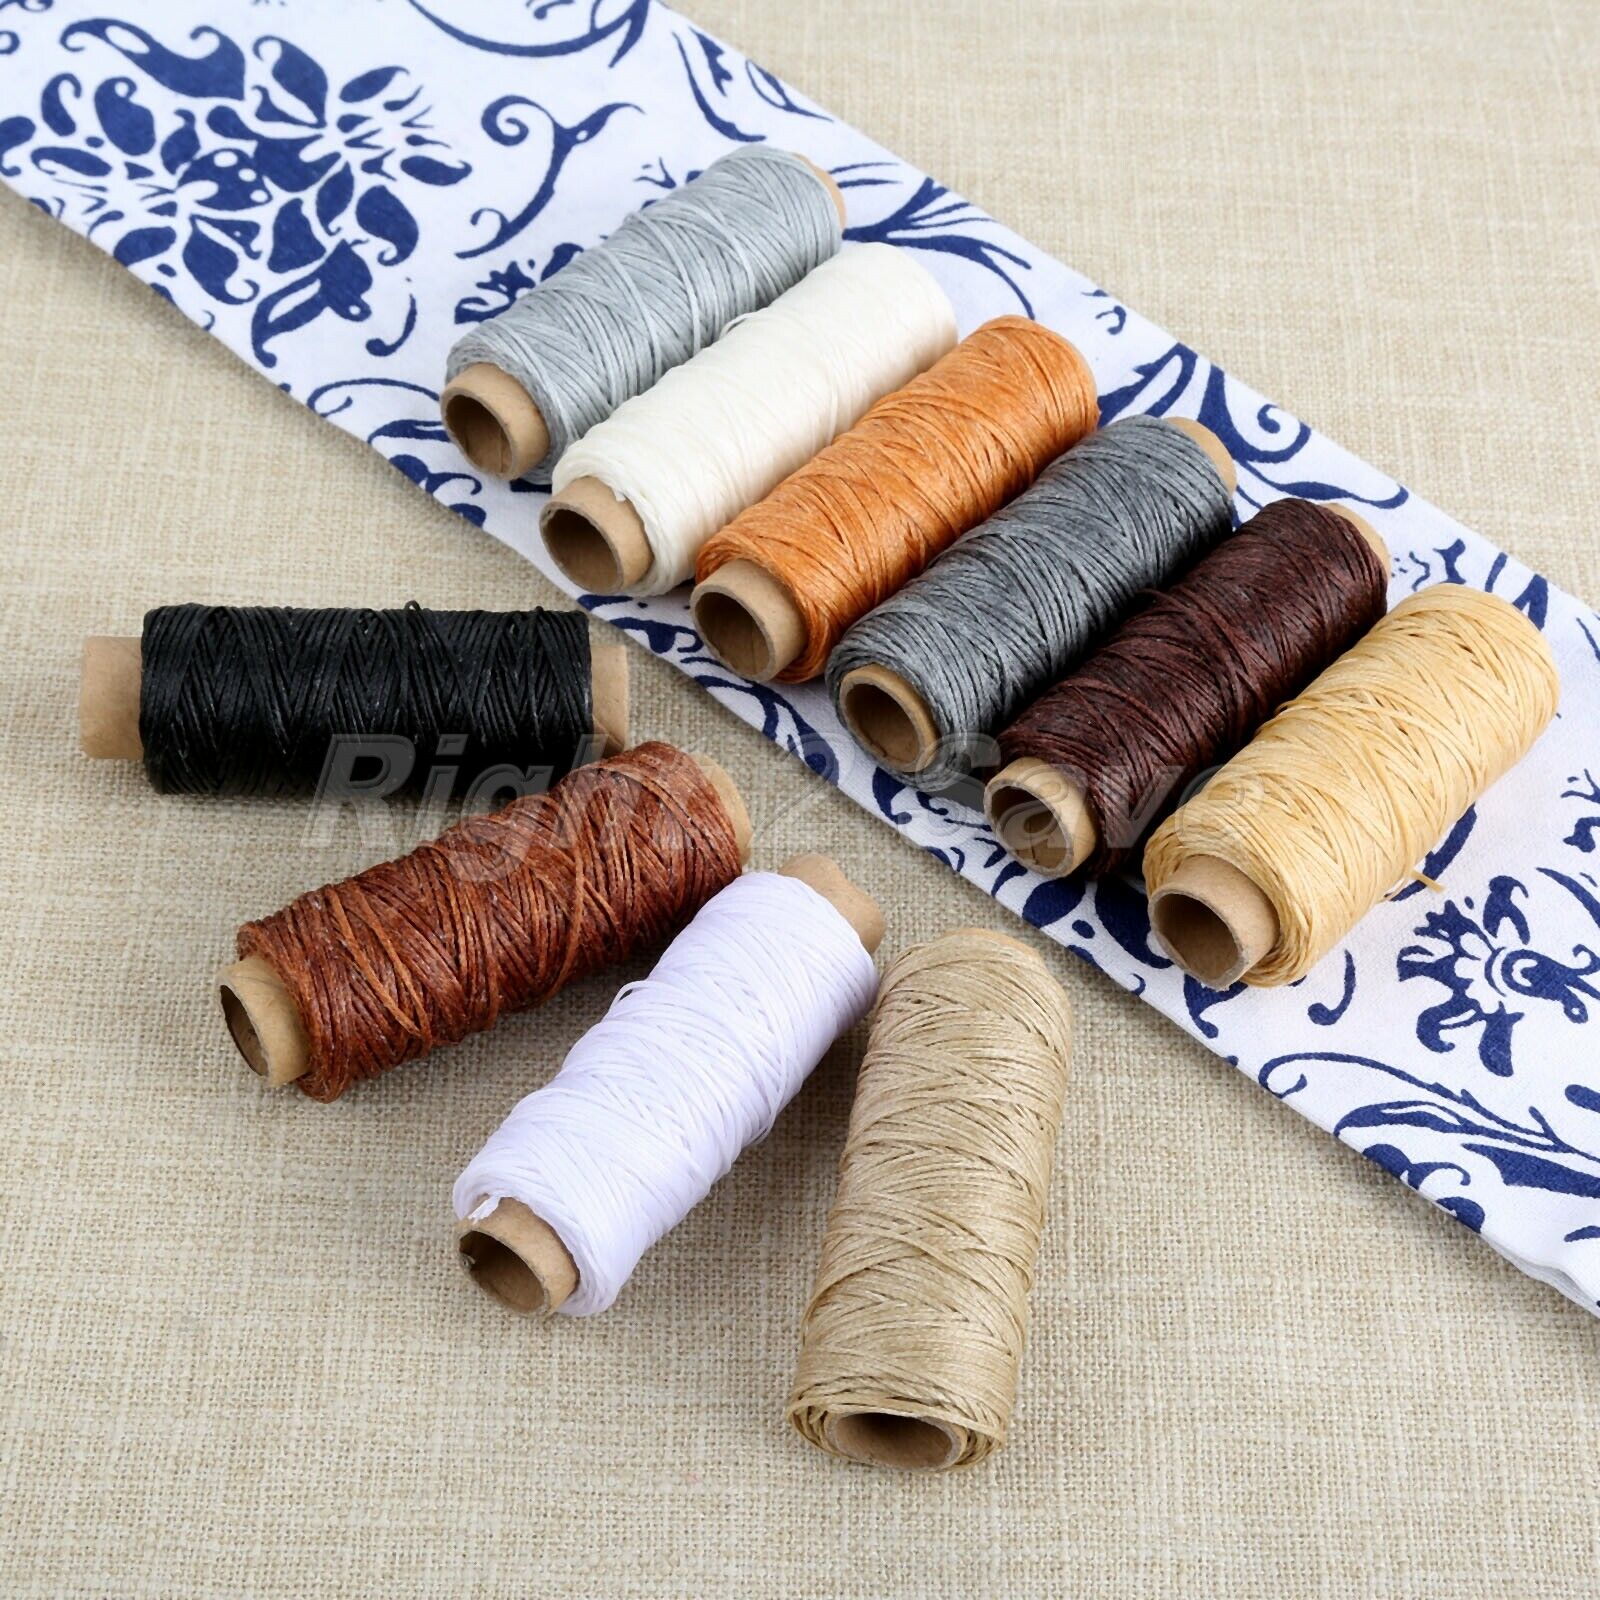 10 Rolls 50m 150D Flat Sewing Wax Line for Handmade Leather Craft DIY 10 Colors